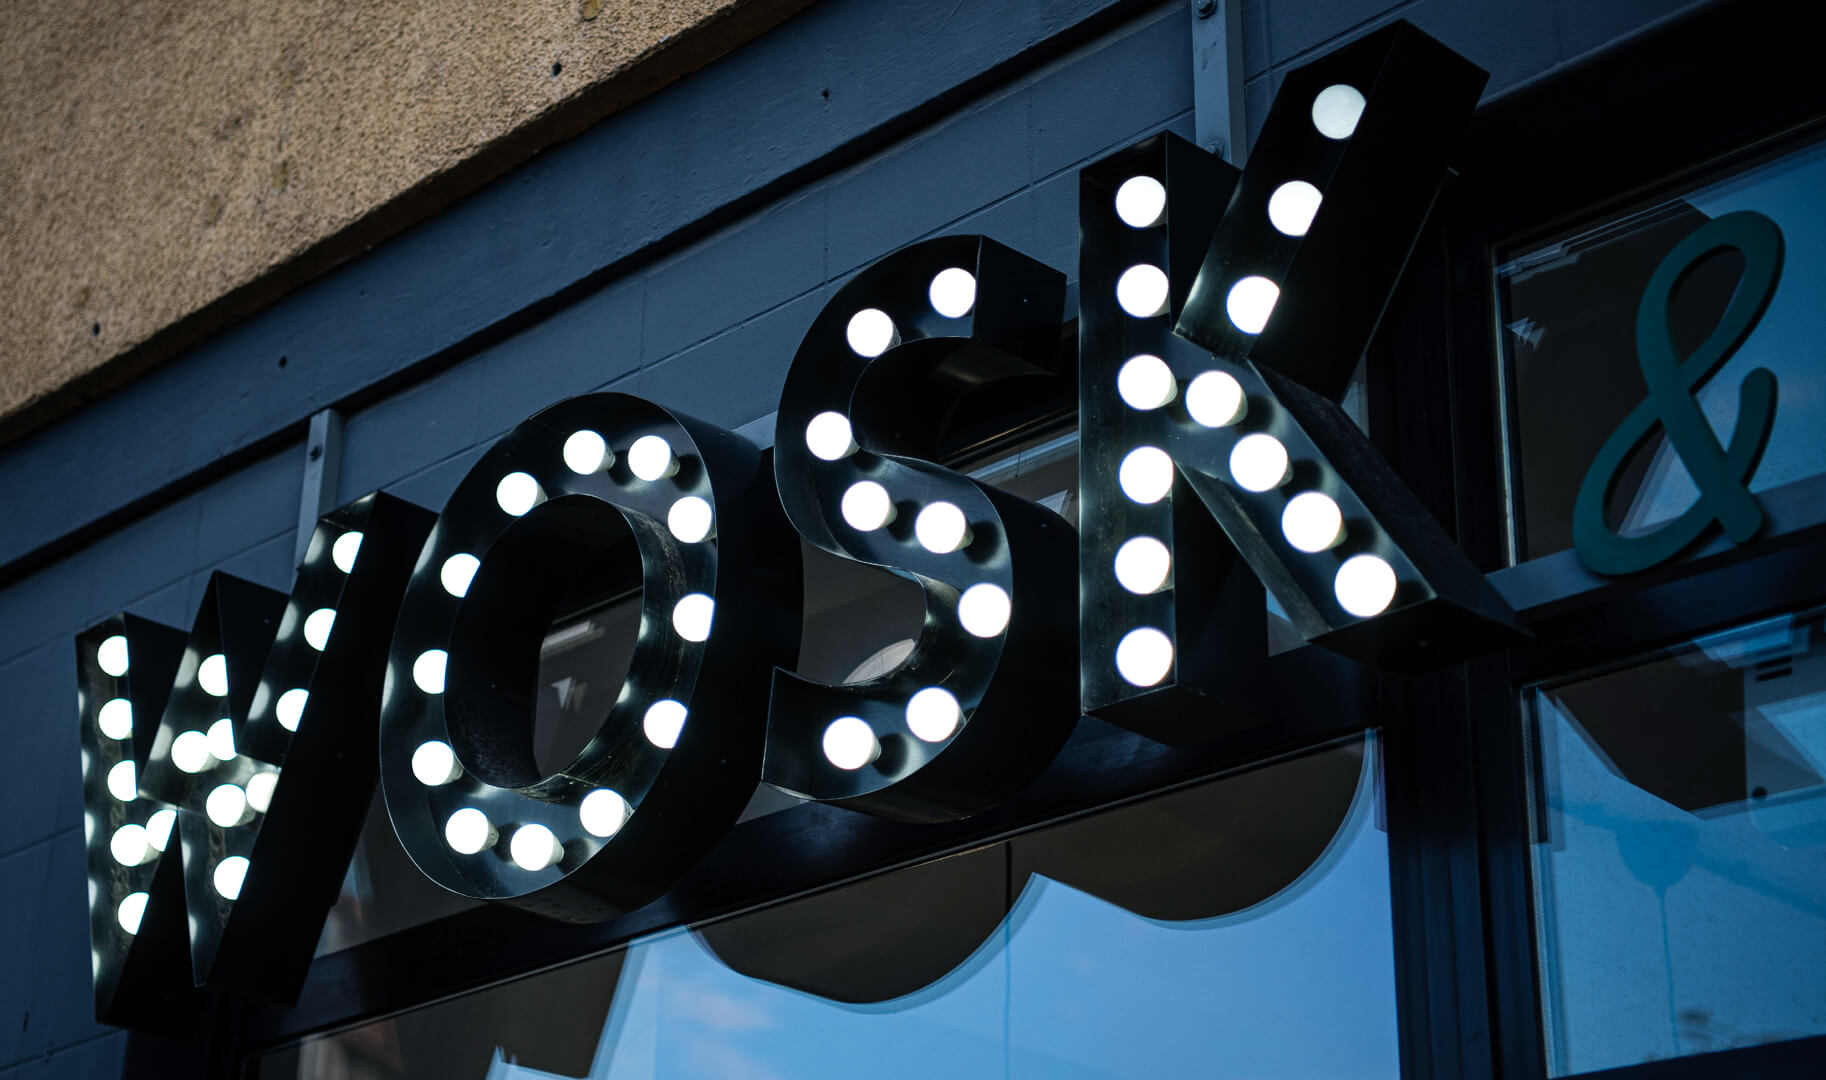 WAX - Letters with bulbs forming the word WOSK, white bulbs embedded in black letters